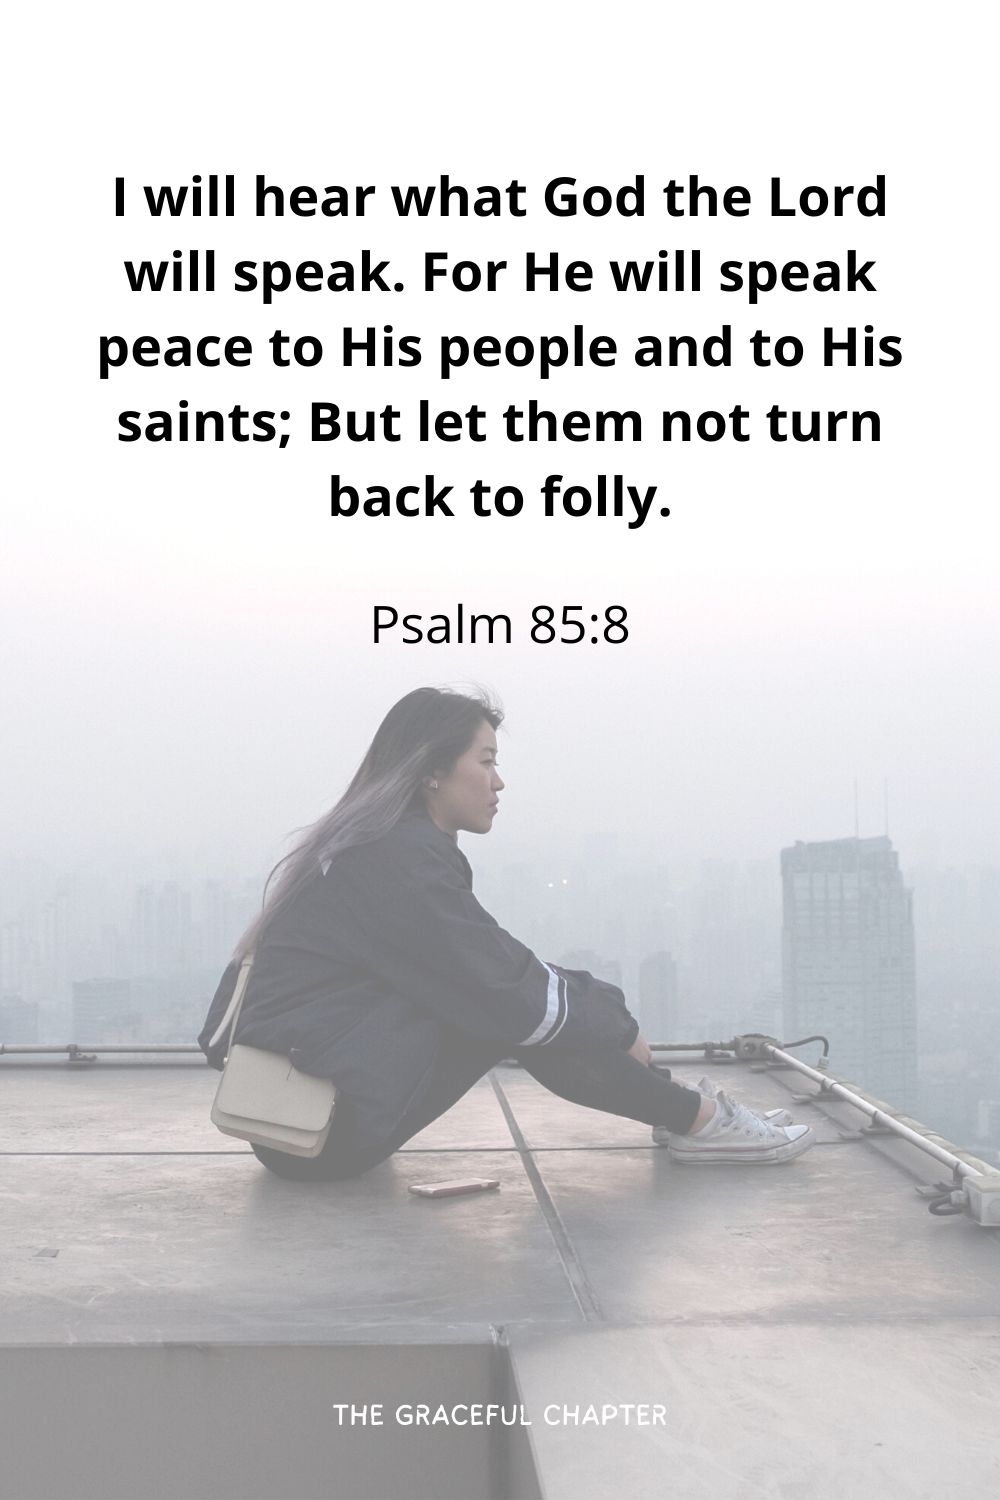 I will hear what God the Lord will speak. For He will speak peace to His people and to His saints; But let them not turn back to folly.